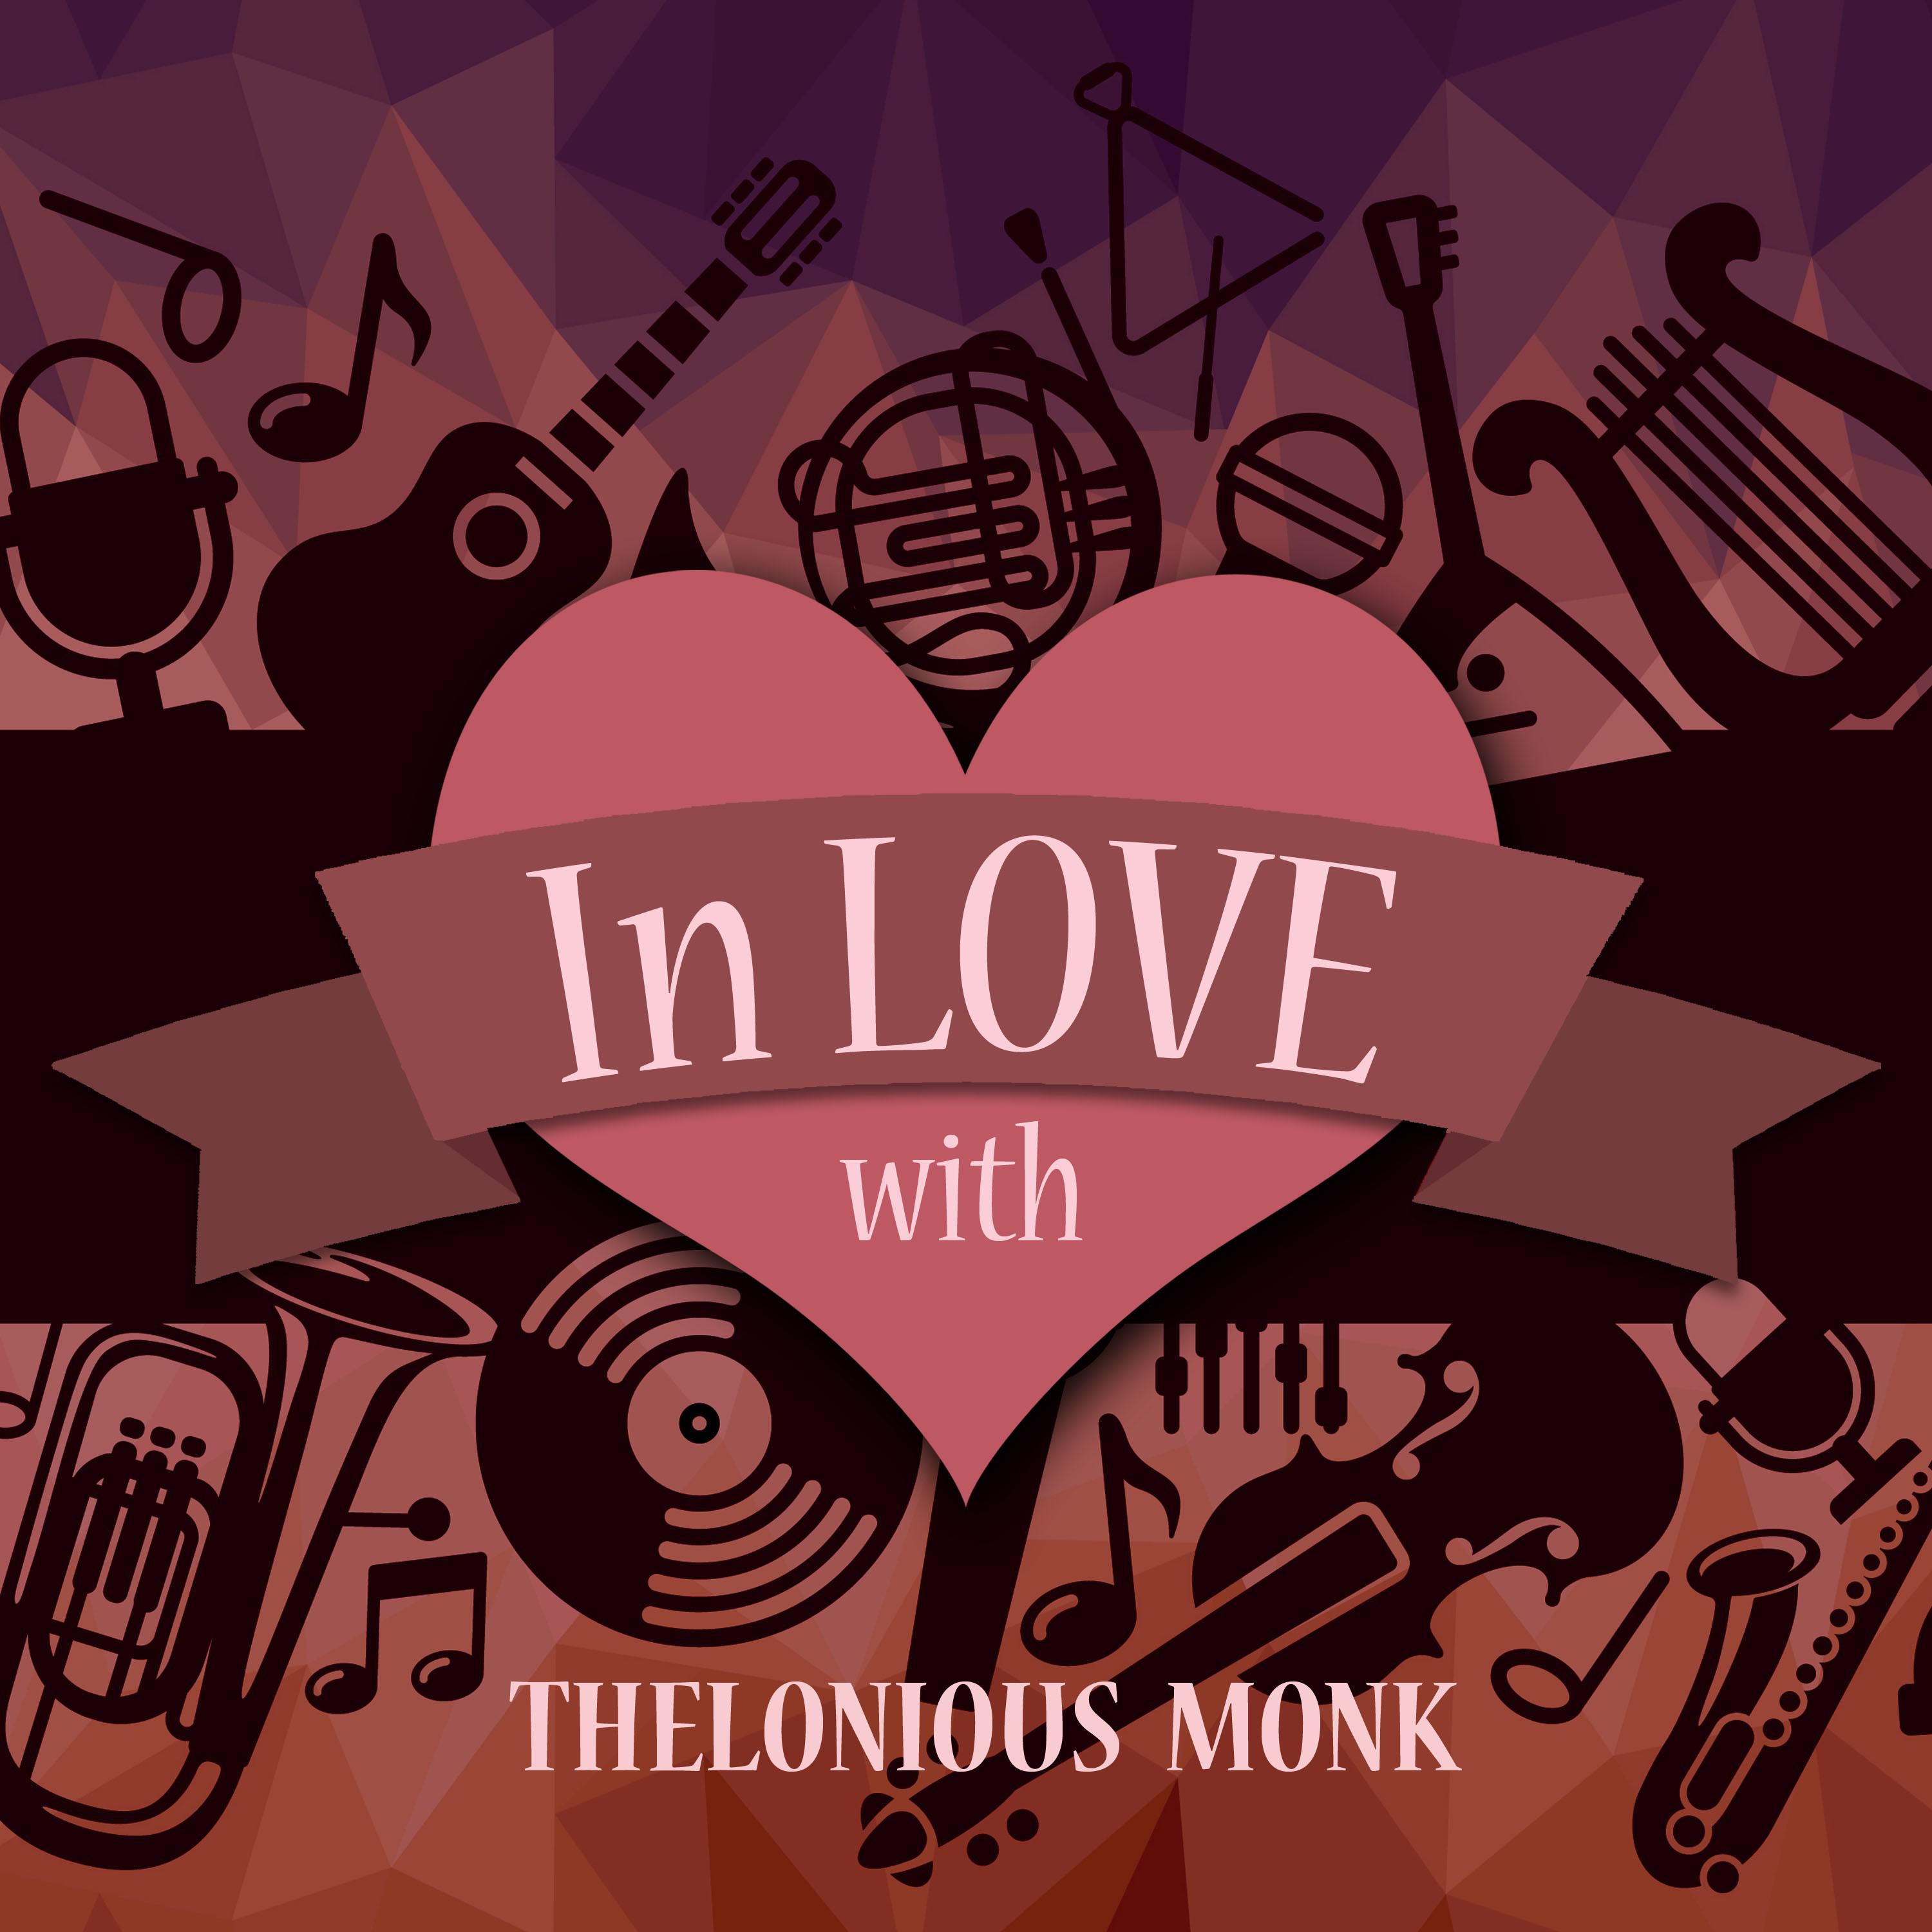 In Love with Thelonious Monk